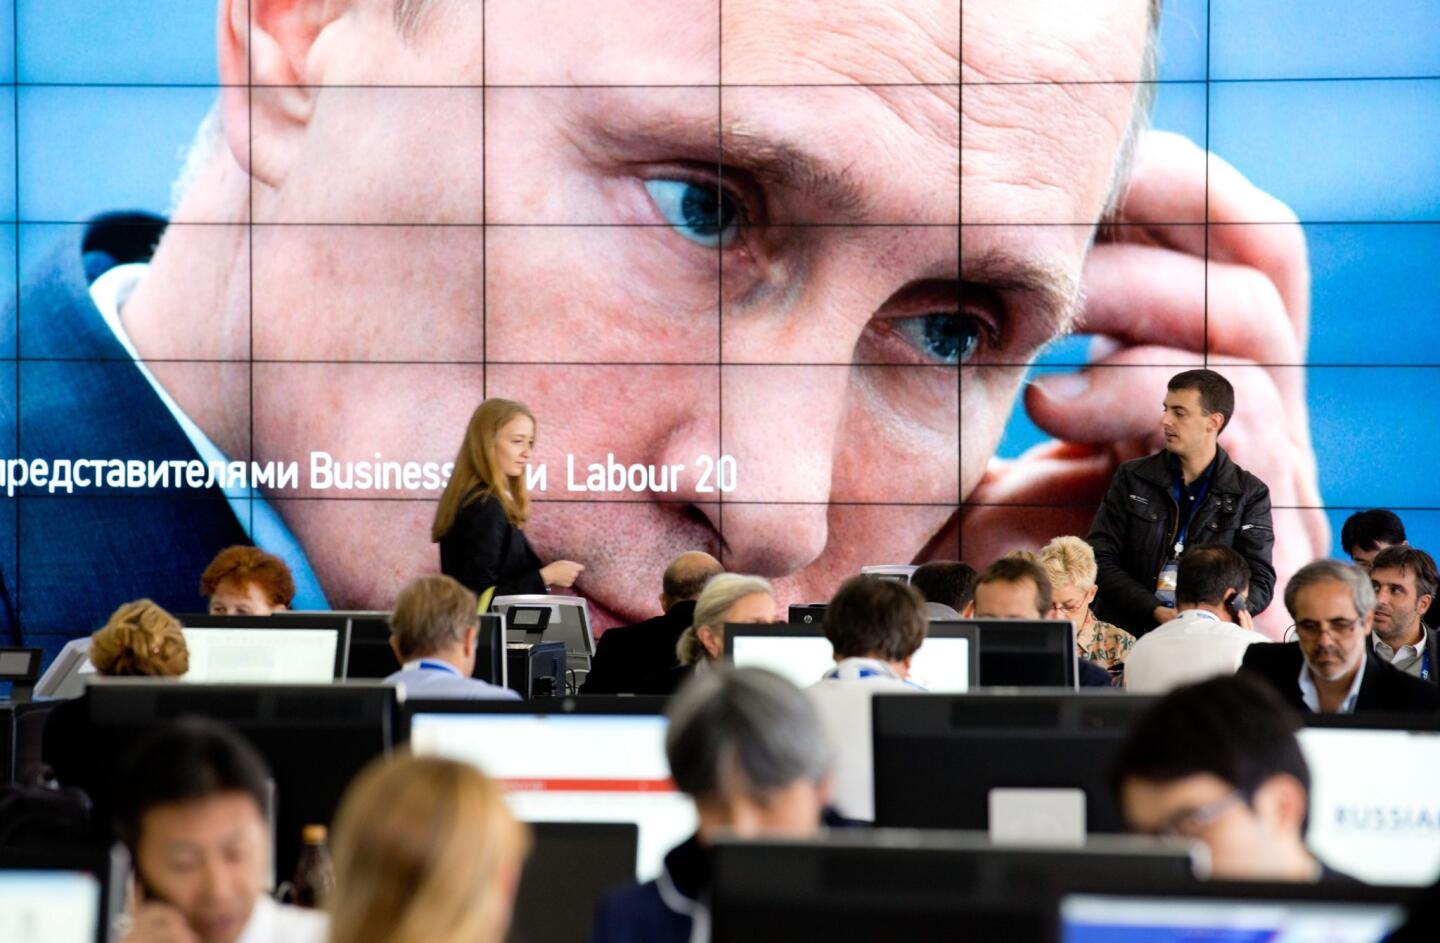 The eyes of Russia's President Vladimir Putin peer out from a giant screen in the media center at the G20 summit in St. Petersburg.